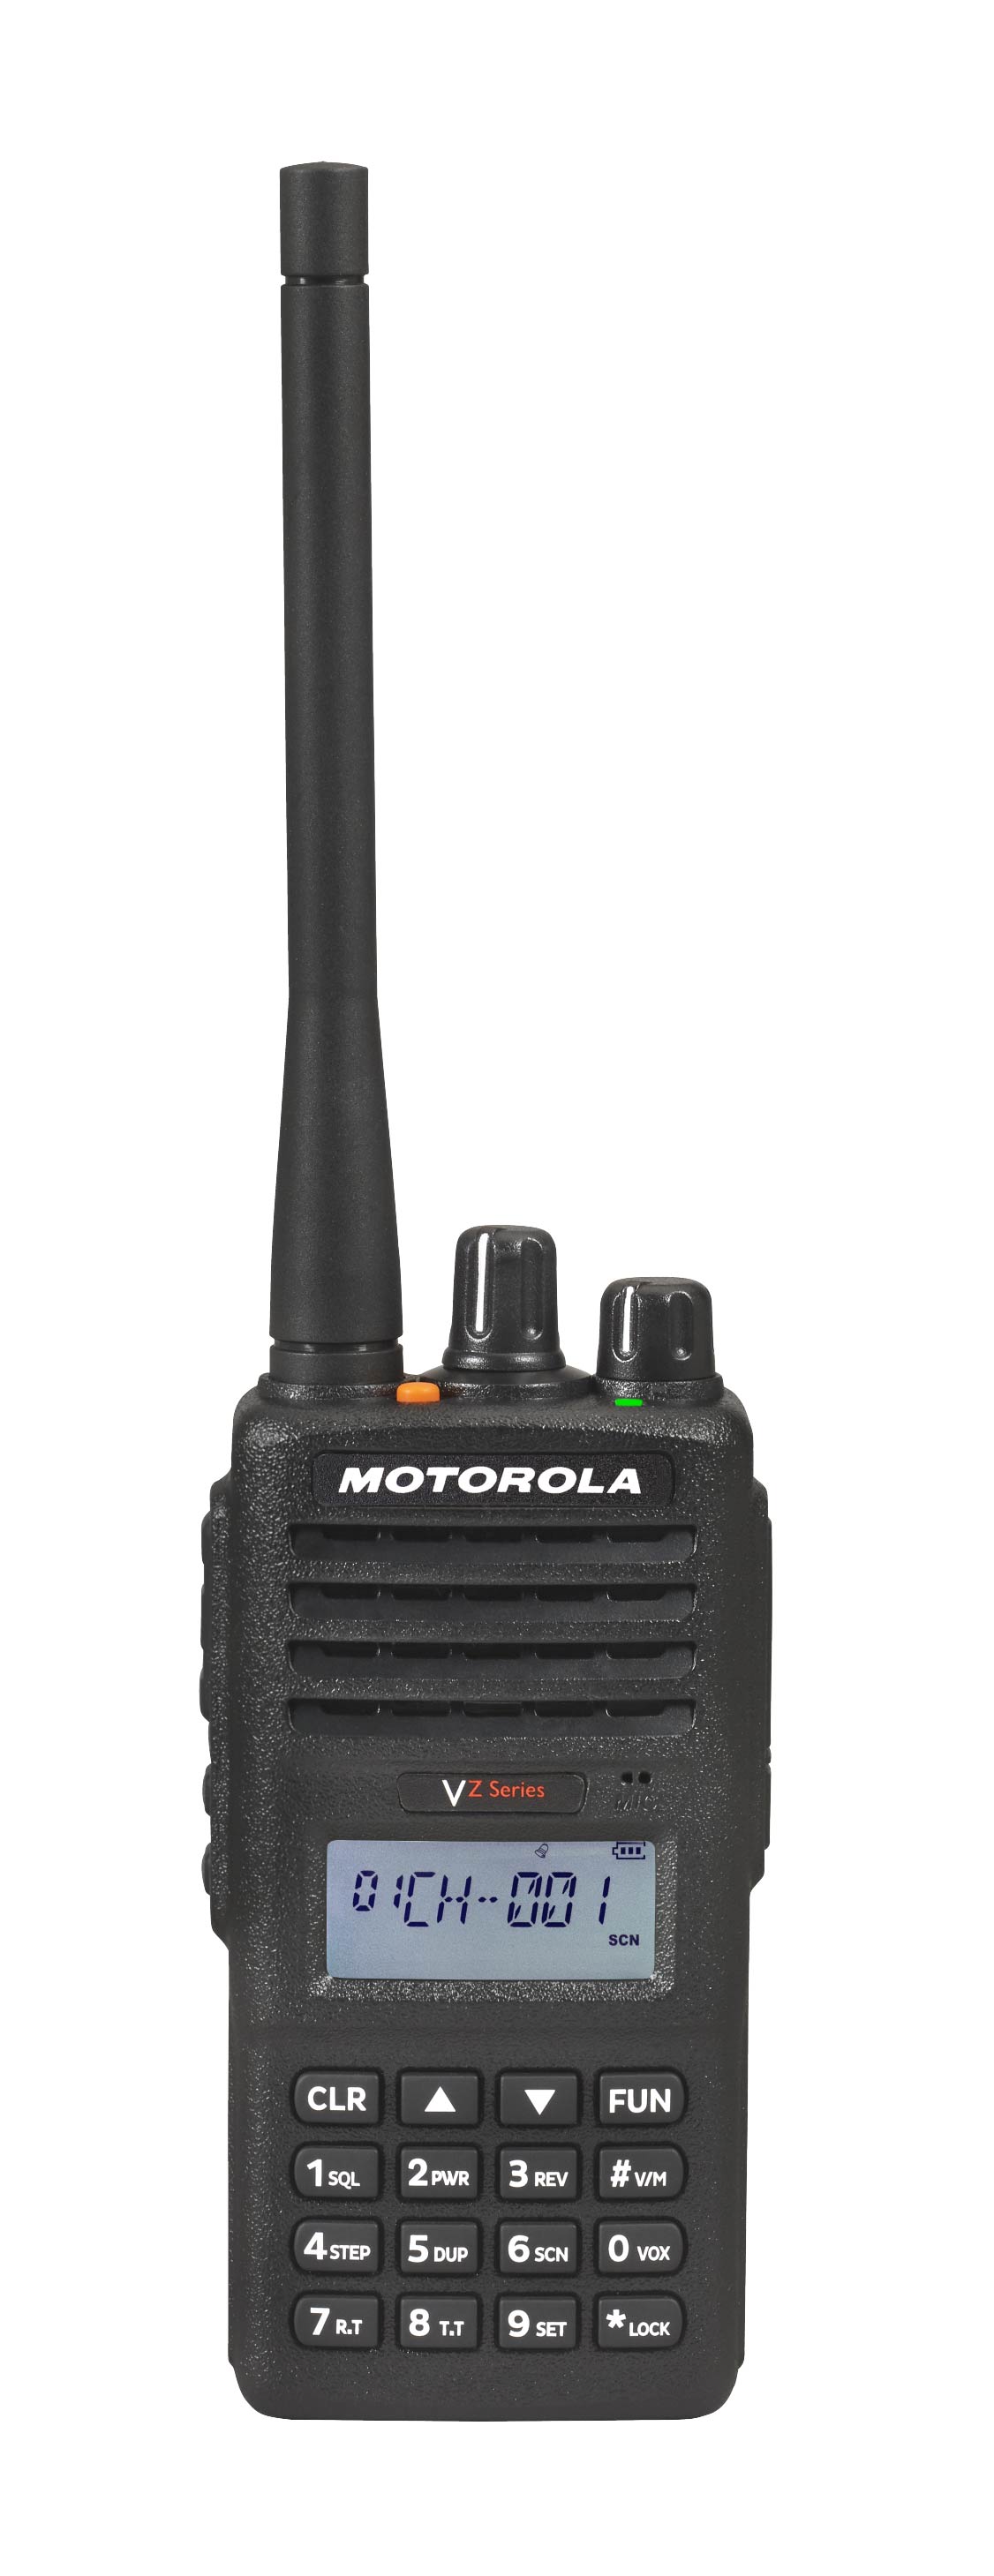 Motorola Ht750 4 Channel VHF Portable Radio With Charger for sale online 